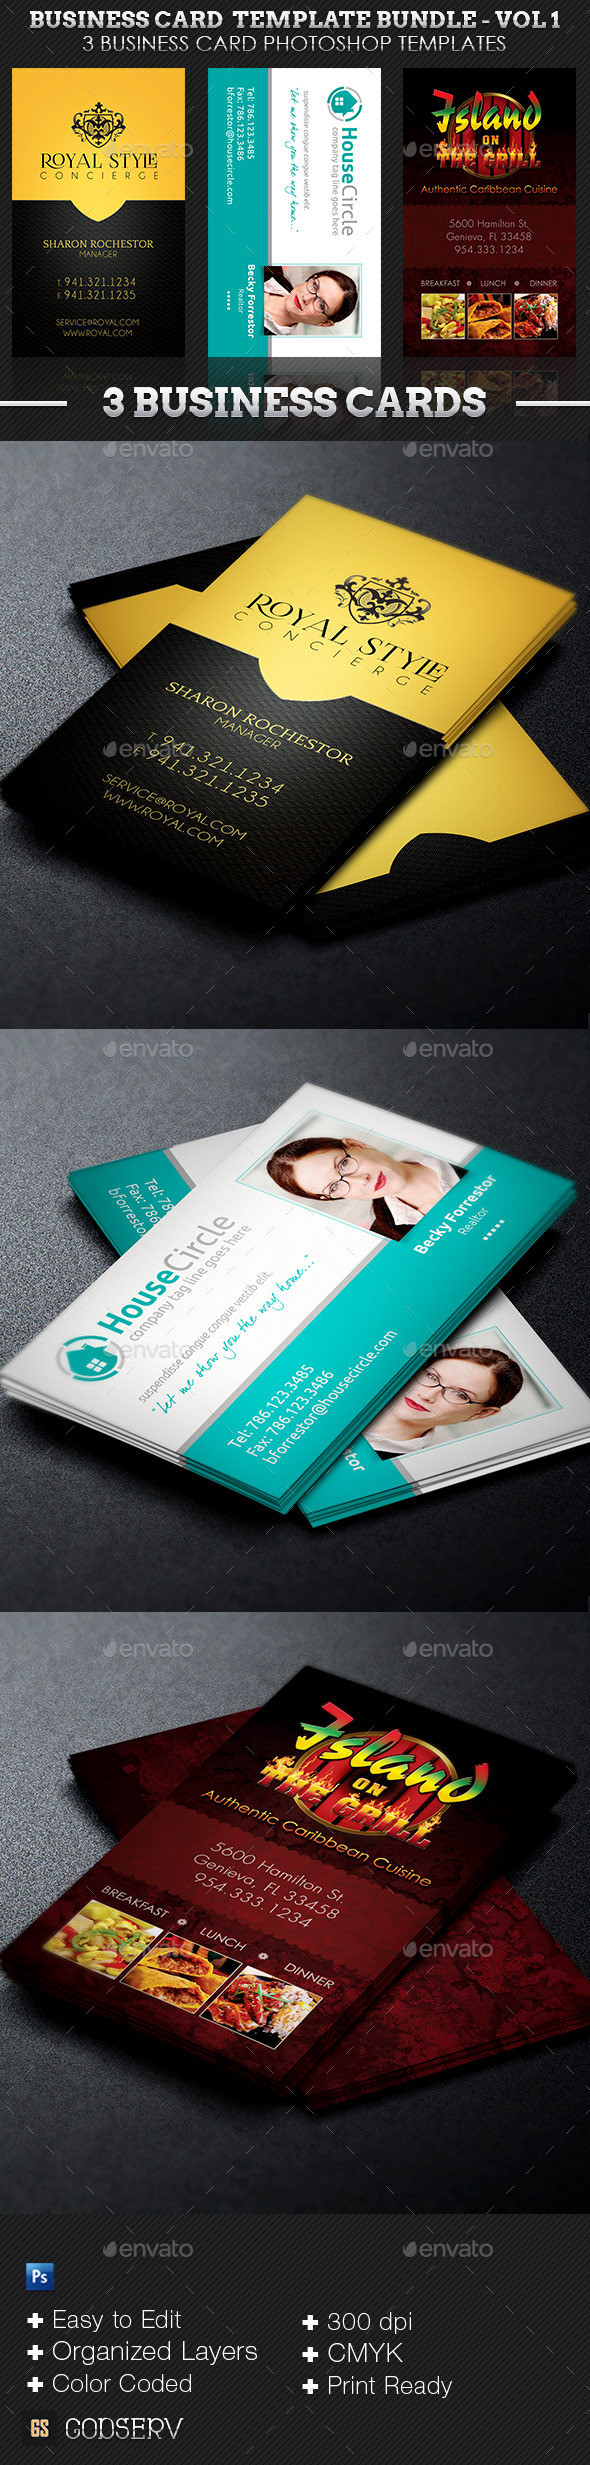 Business card bundle   volume 1 preview